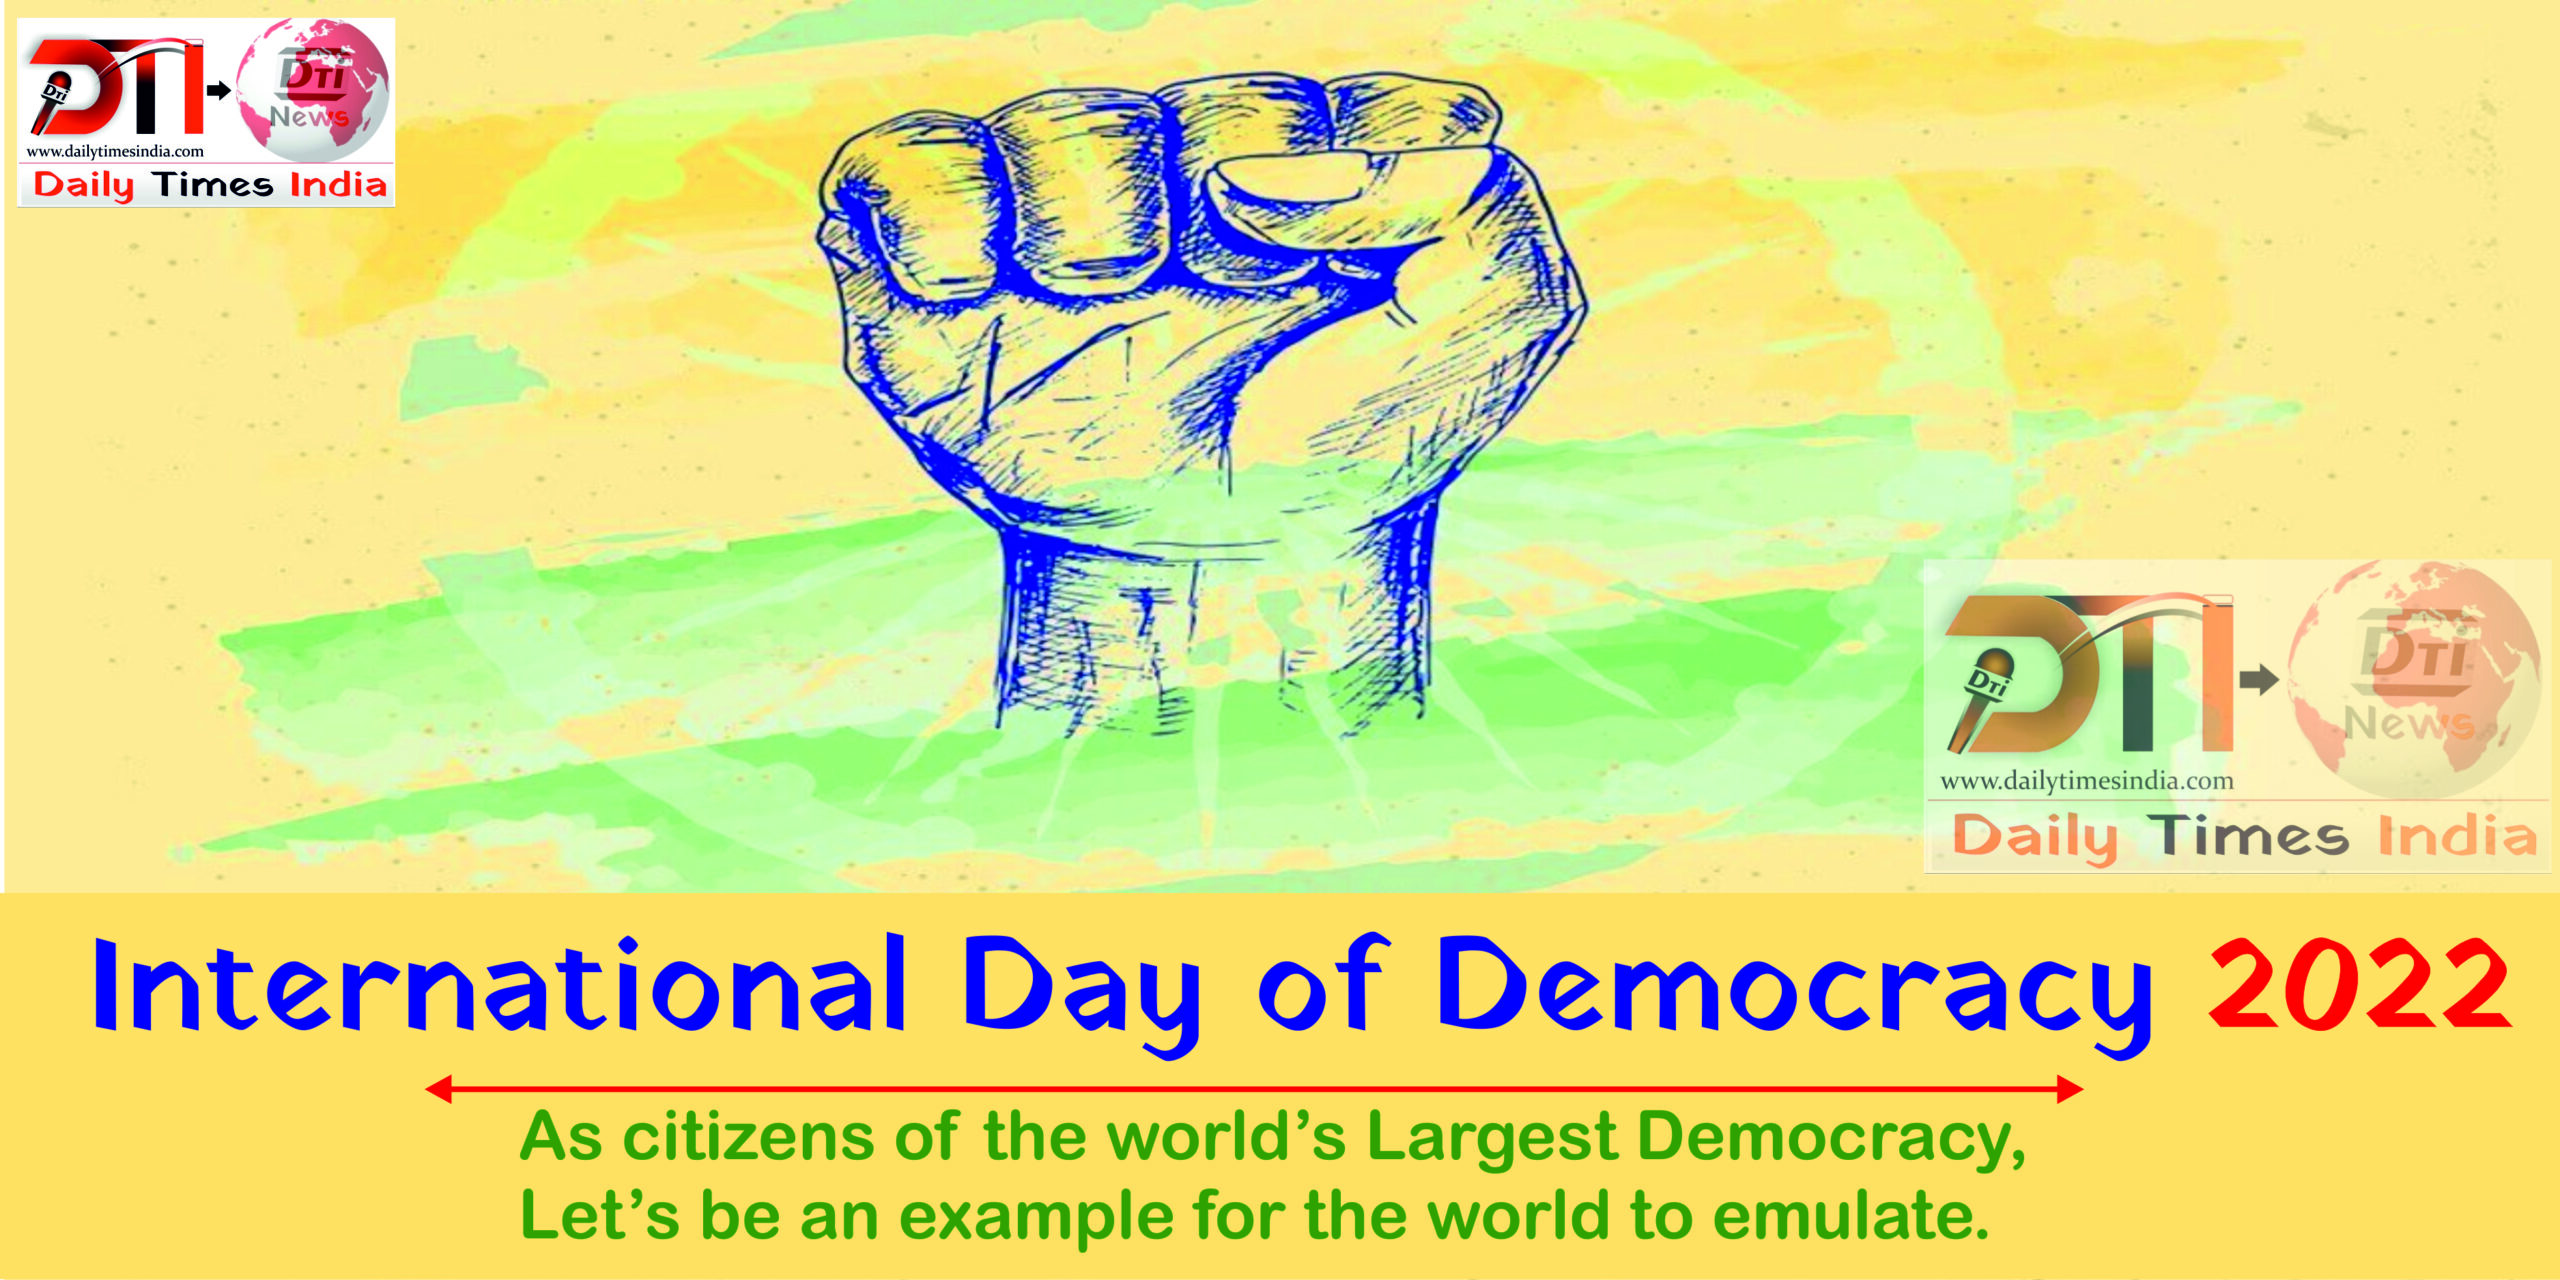 International Day of Democracy 2022: Why is International Day of Democracy celebrated only on September 15? Know History & Significance